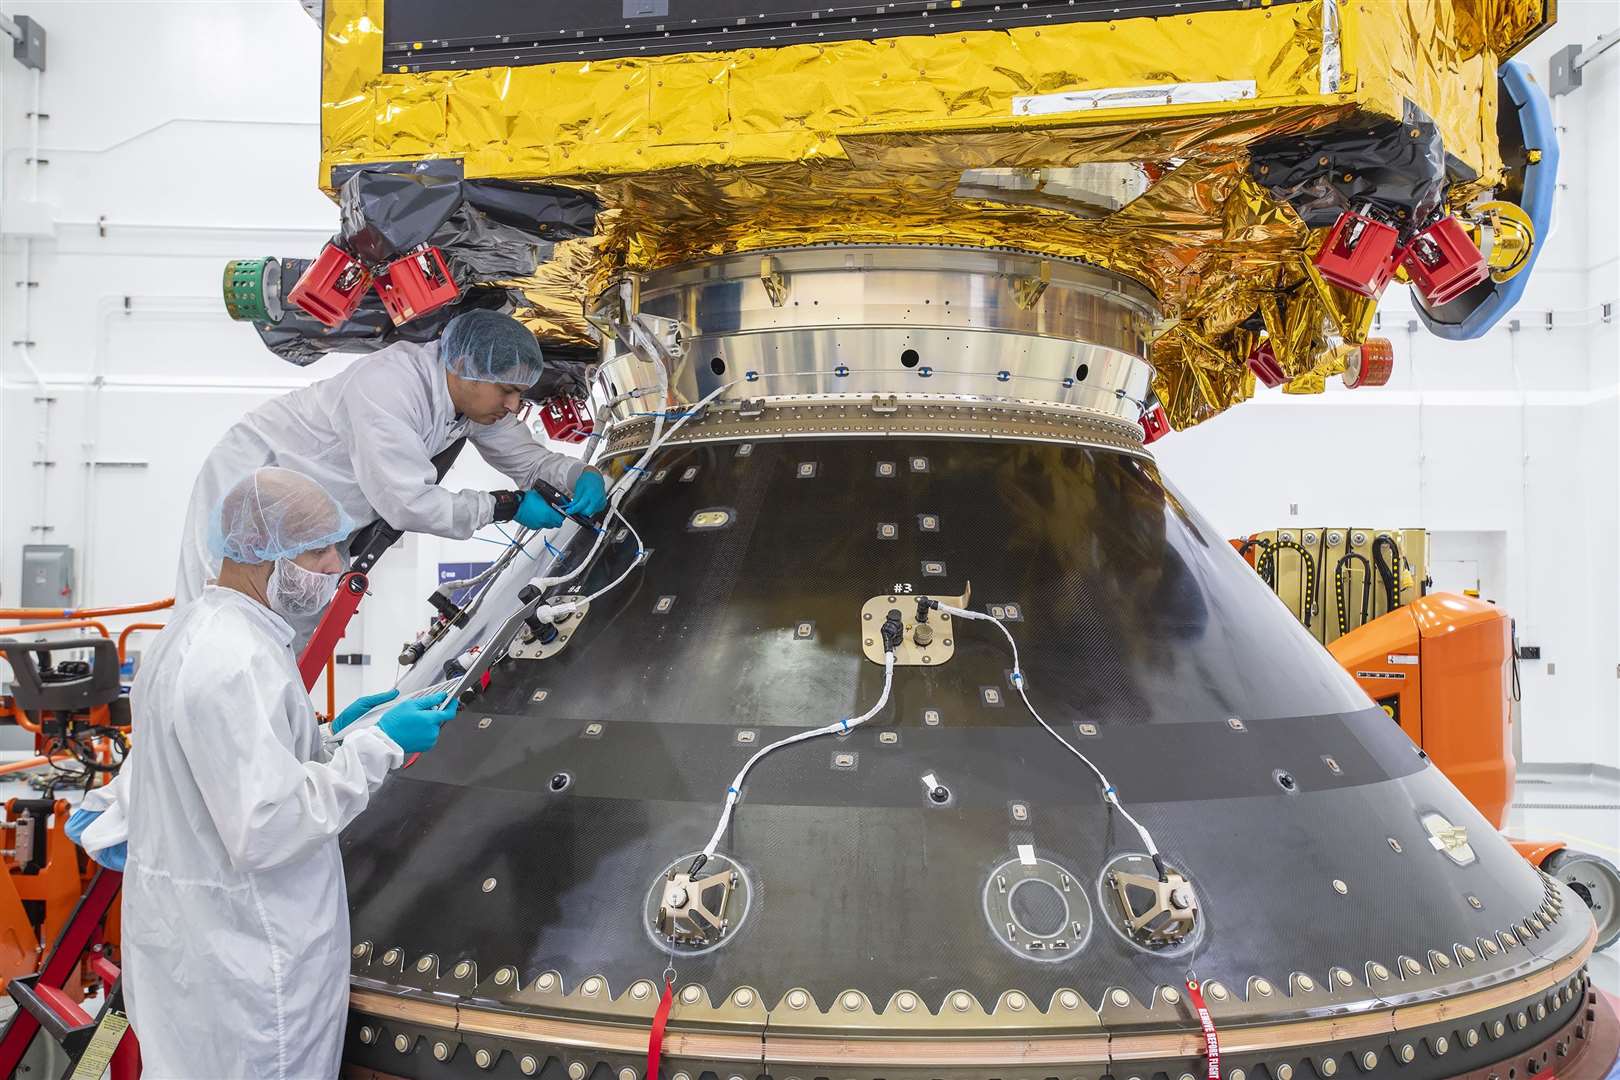 Euclid being secured on SpaceX’s Falcon 9 rocket (ESA/SpaceX/PA)